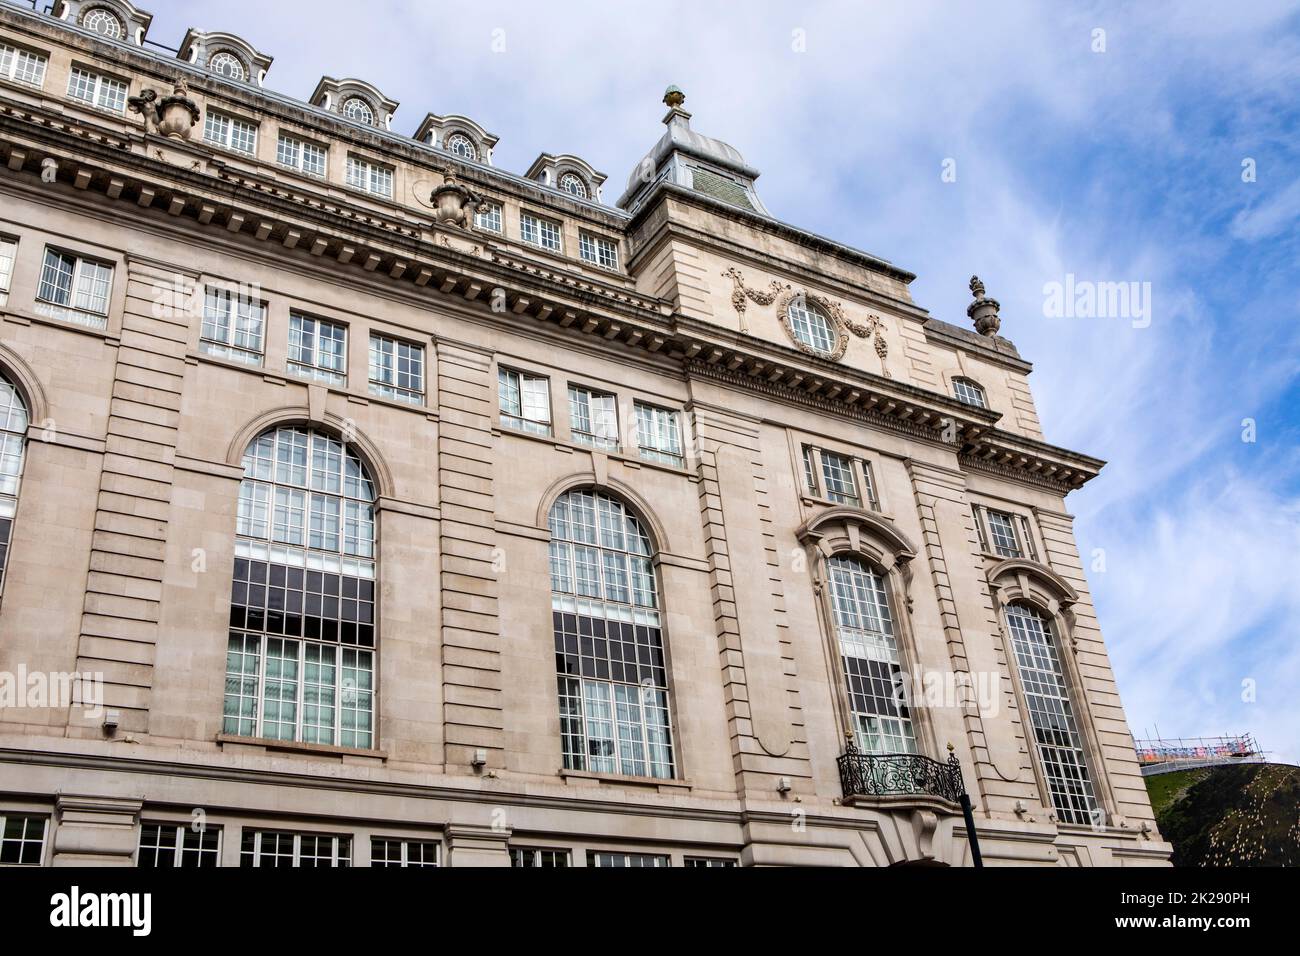 Magnificent architecture of a building on Piccadilly in central London, UK. Stock Photo